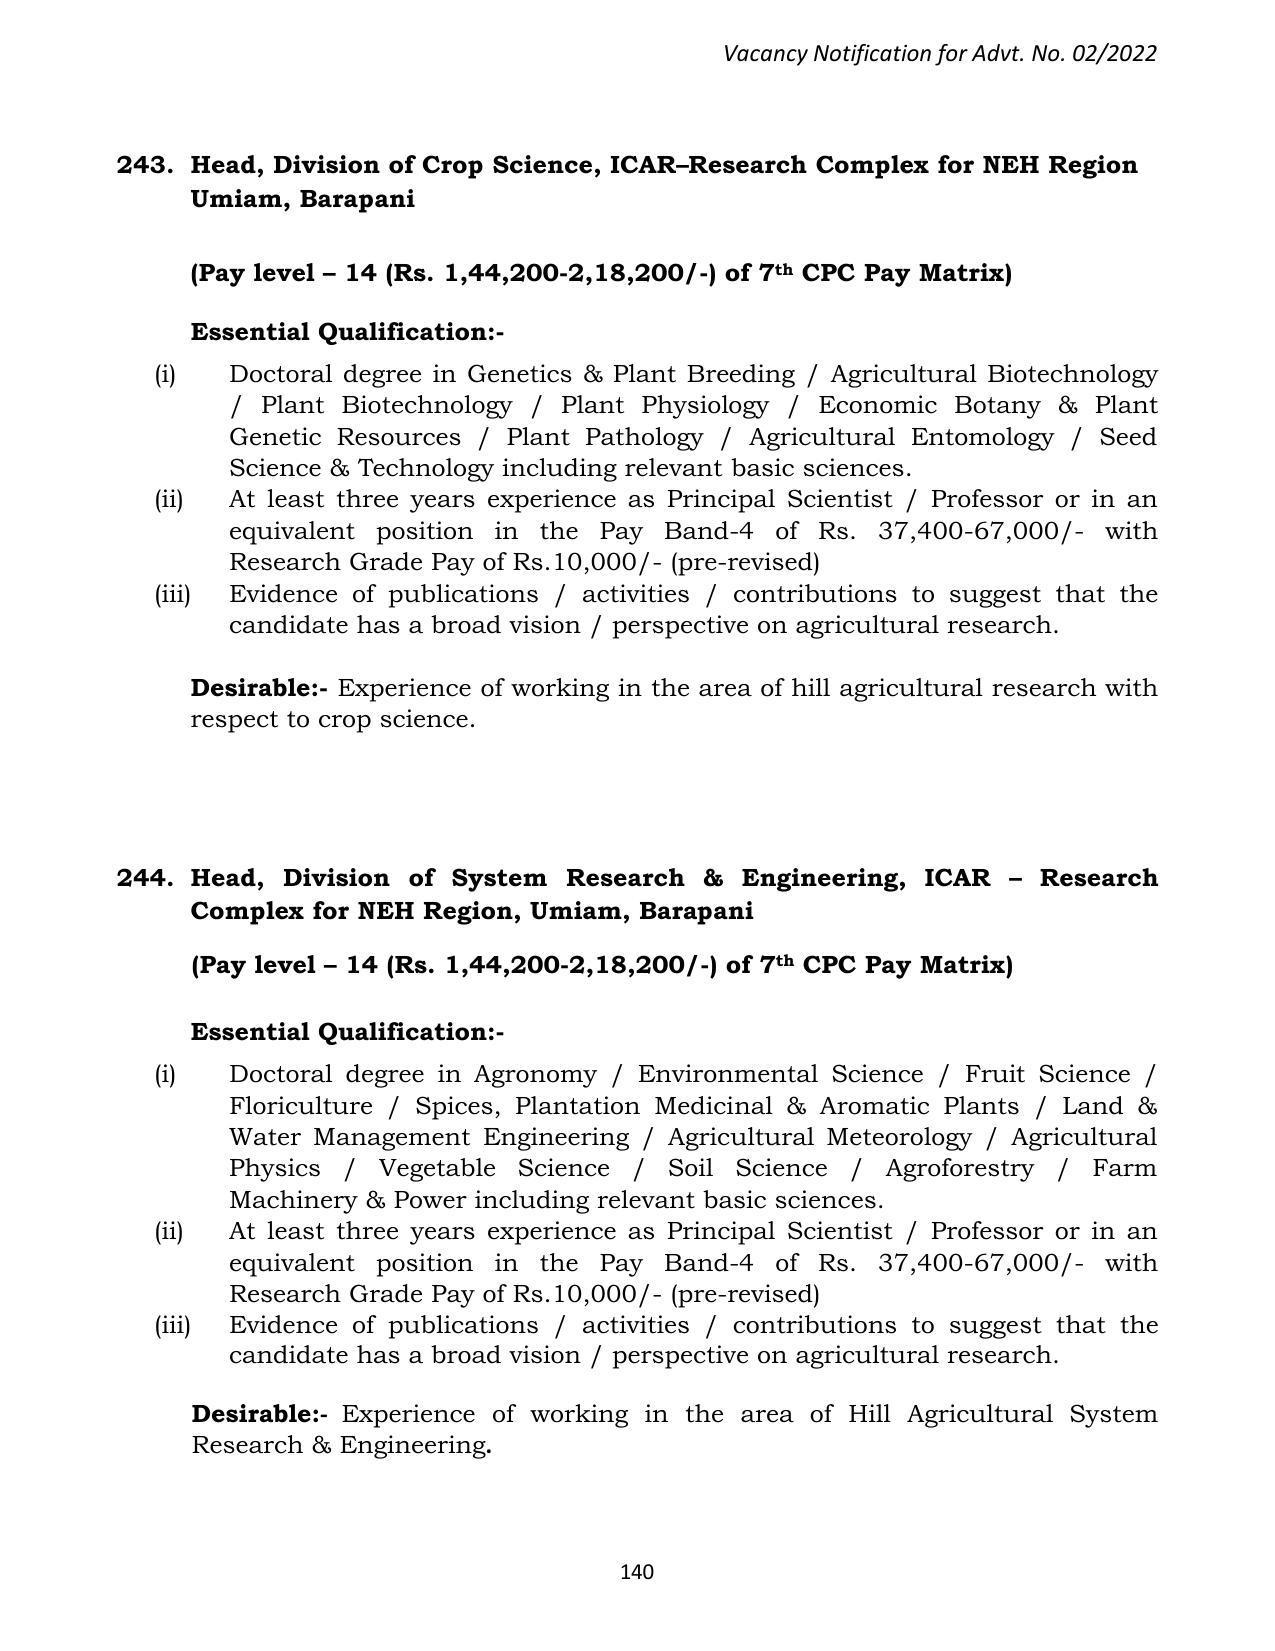 ASRB Non-Research Management Recruitment 2022 - Page 107